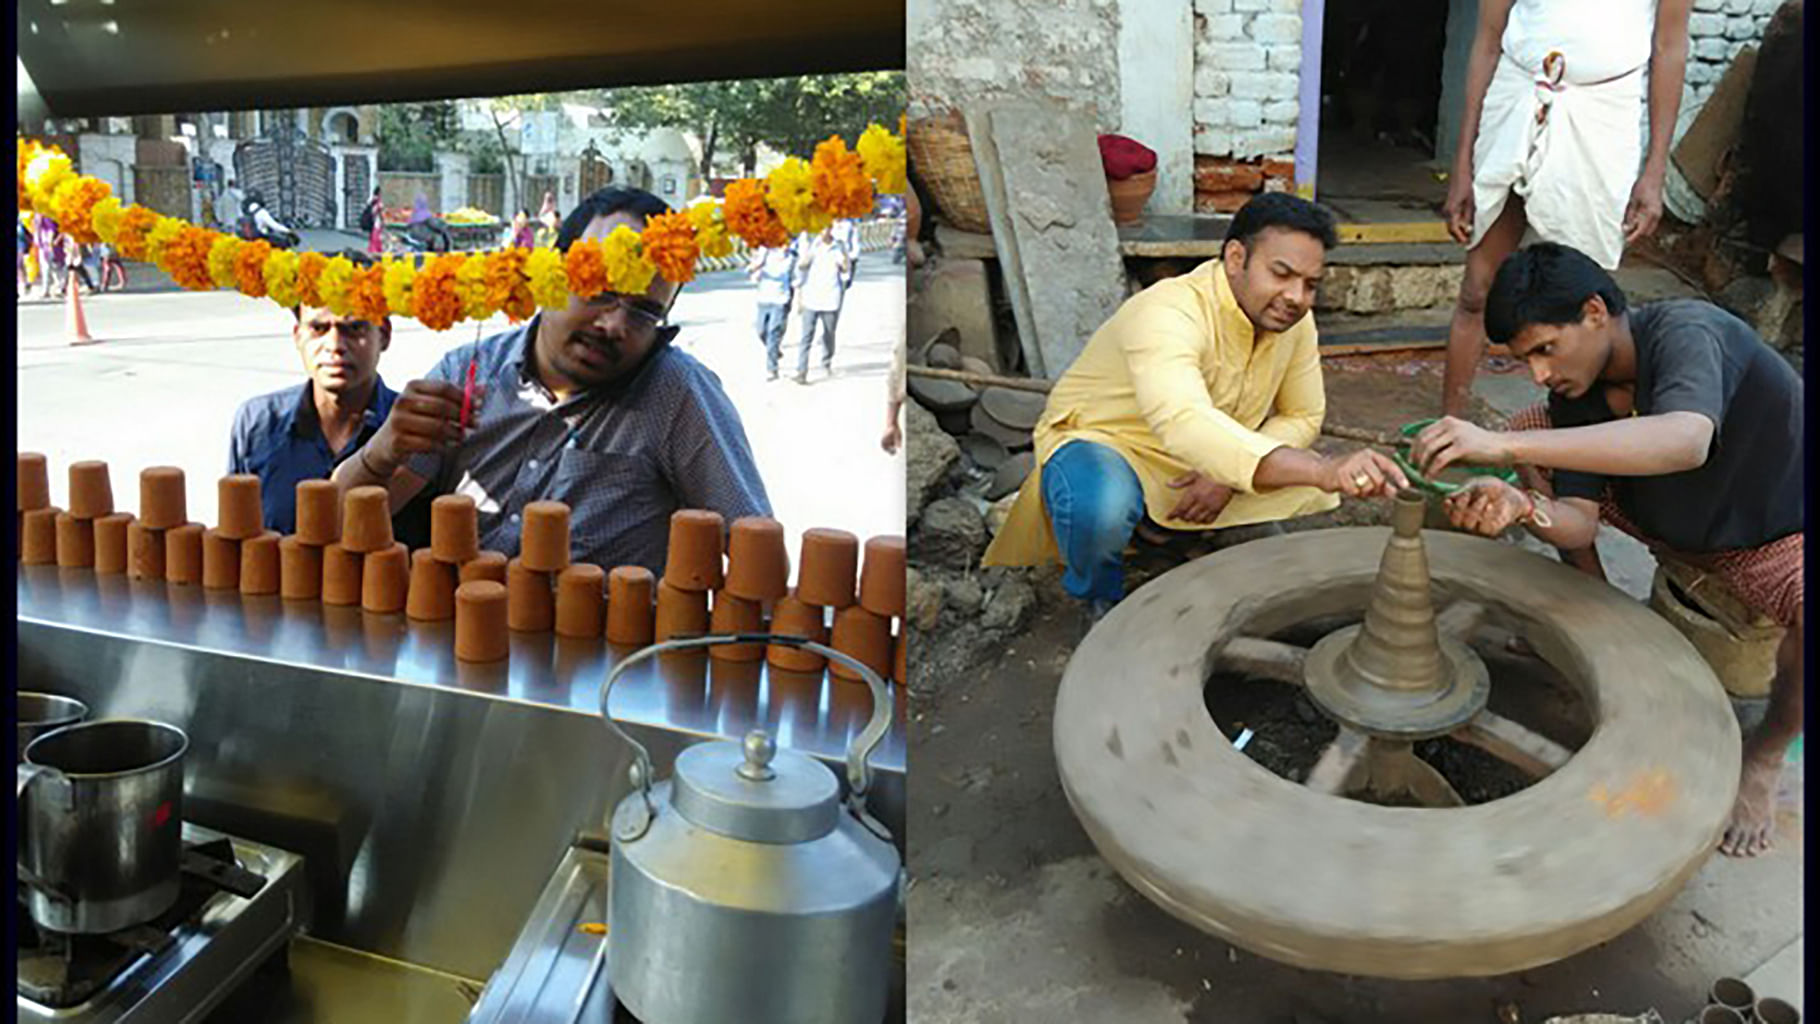 The tea stall (left) and the pots being made. (Photo: The News Minute)